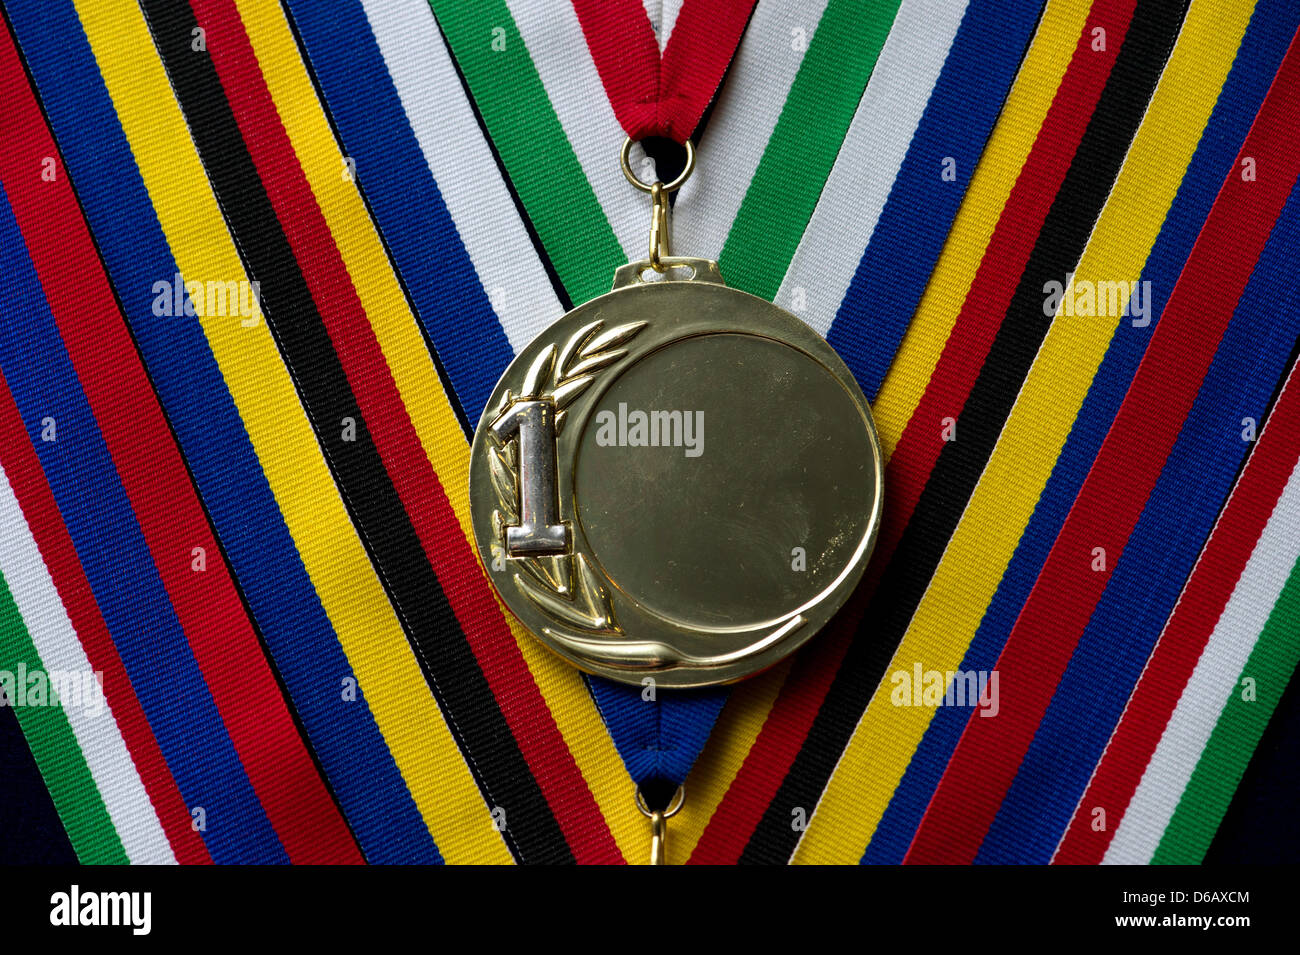 A blank medal made from gold-colored material with 1 printed on it lies on a table in Berlin, Germany, 07 August 2012. Photo: Soeren Stache Stock Photo